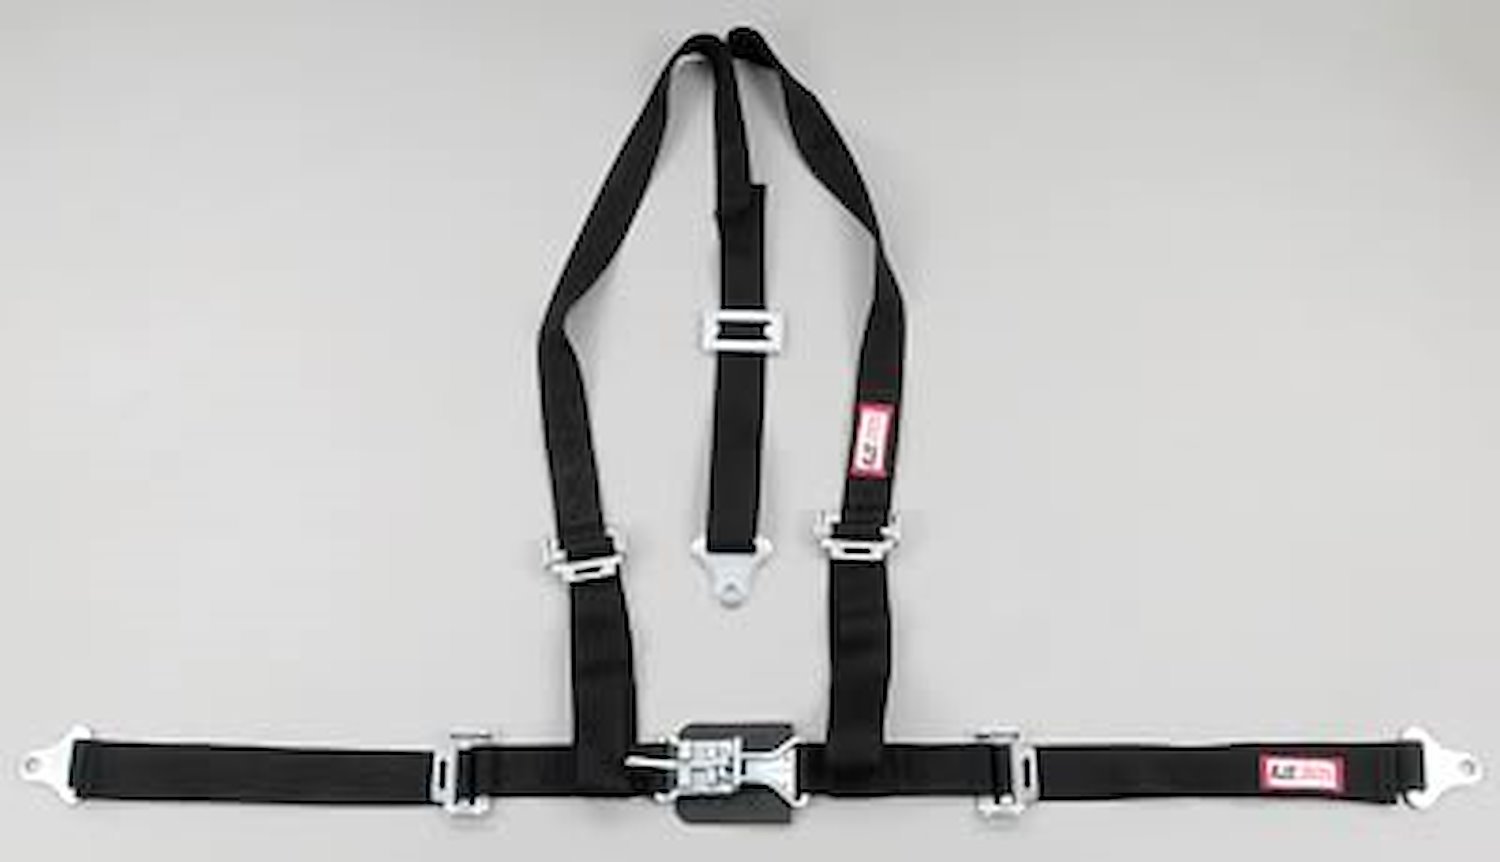 NON-SFI L&L HARNESS 3 PULL DOWN Lap Belt w/adjuster SNAP 2 S.H. Individual FLOOR Mount w/STERNUM STRAP WRAP/SNAP YELLOW